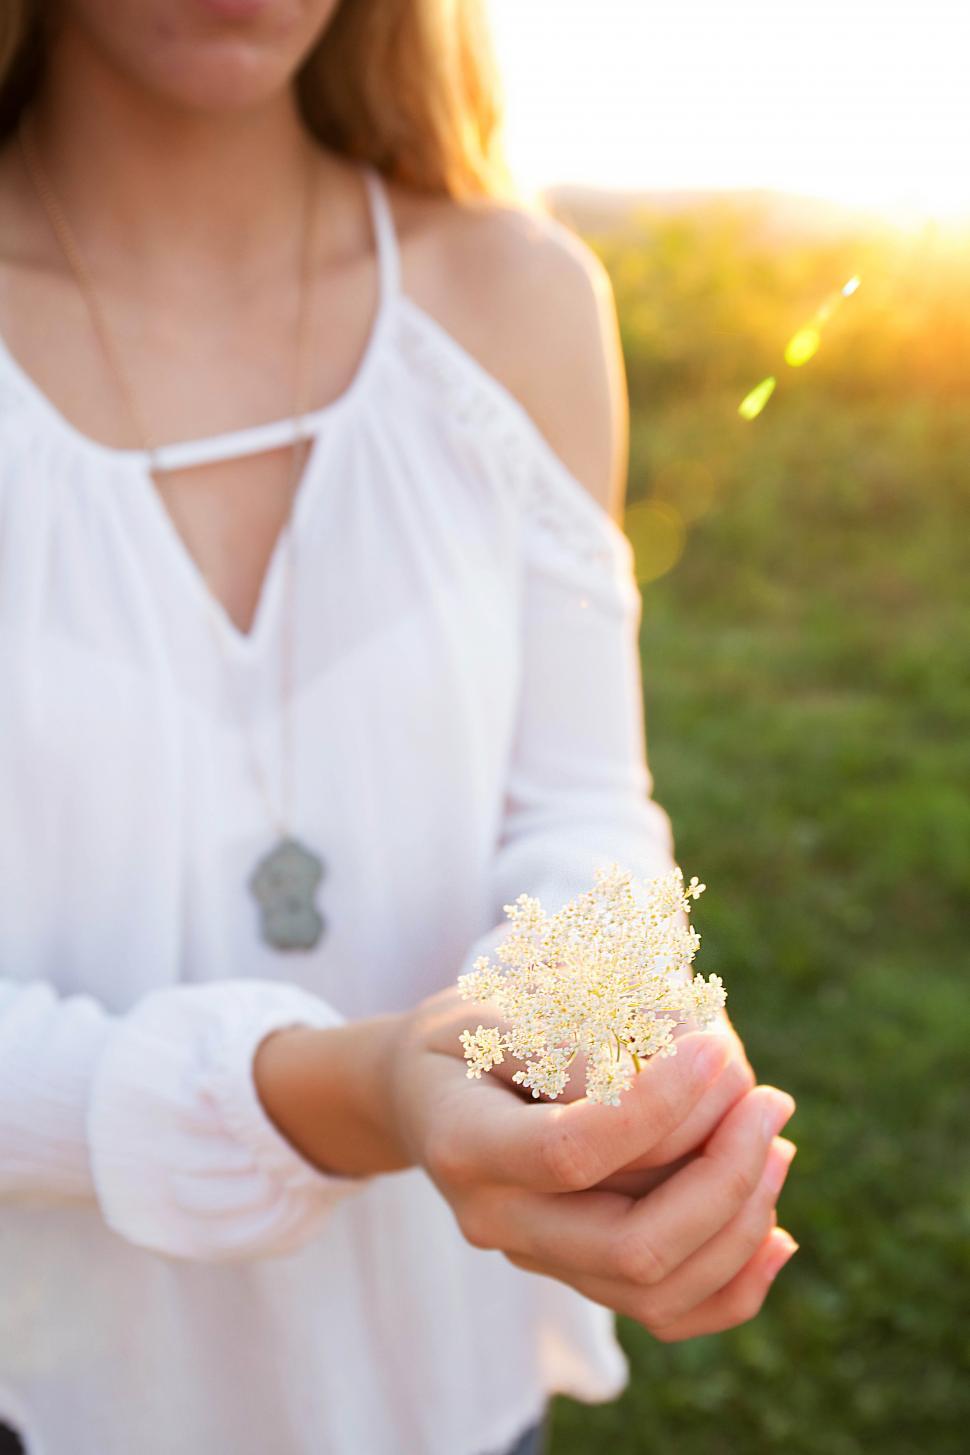 Free Image of A person holding a flower 